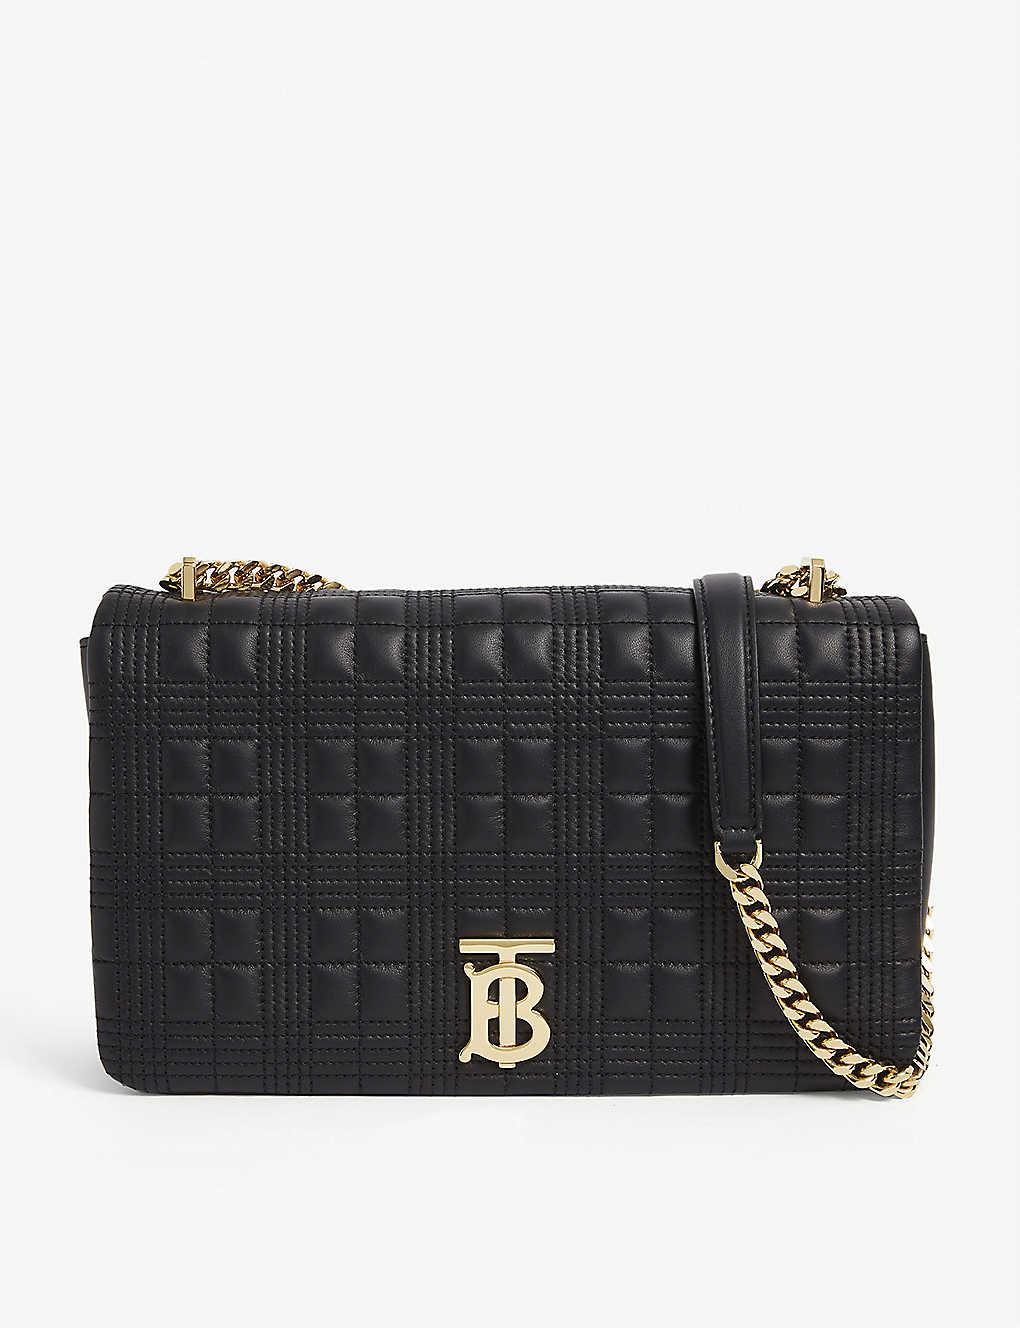 Burberry Lola Medium Quilted Leather Shoulder Bag in Black - Lyst